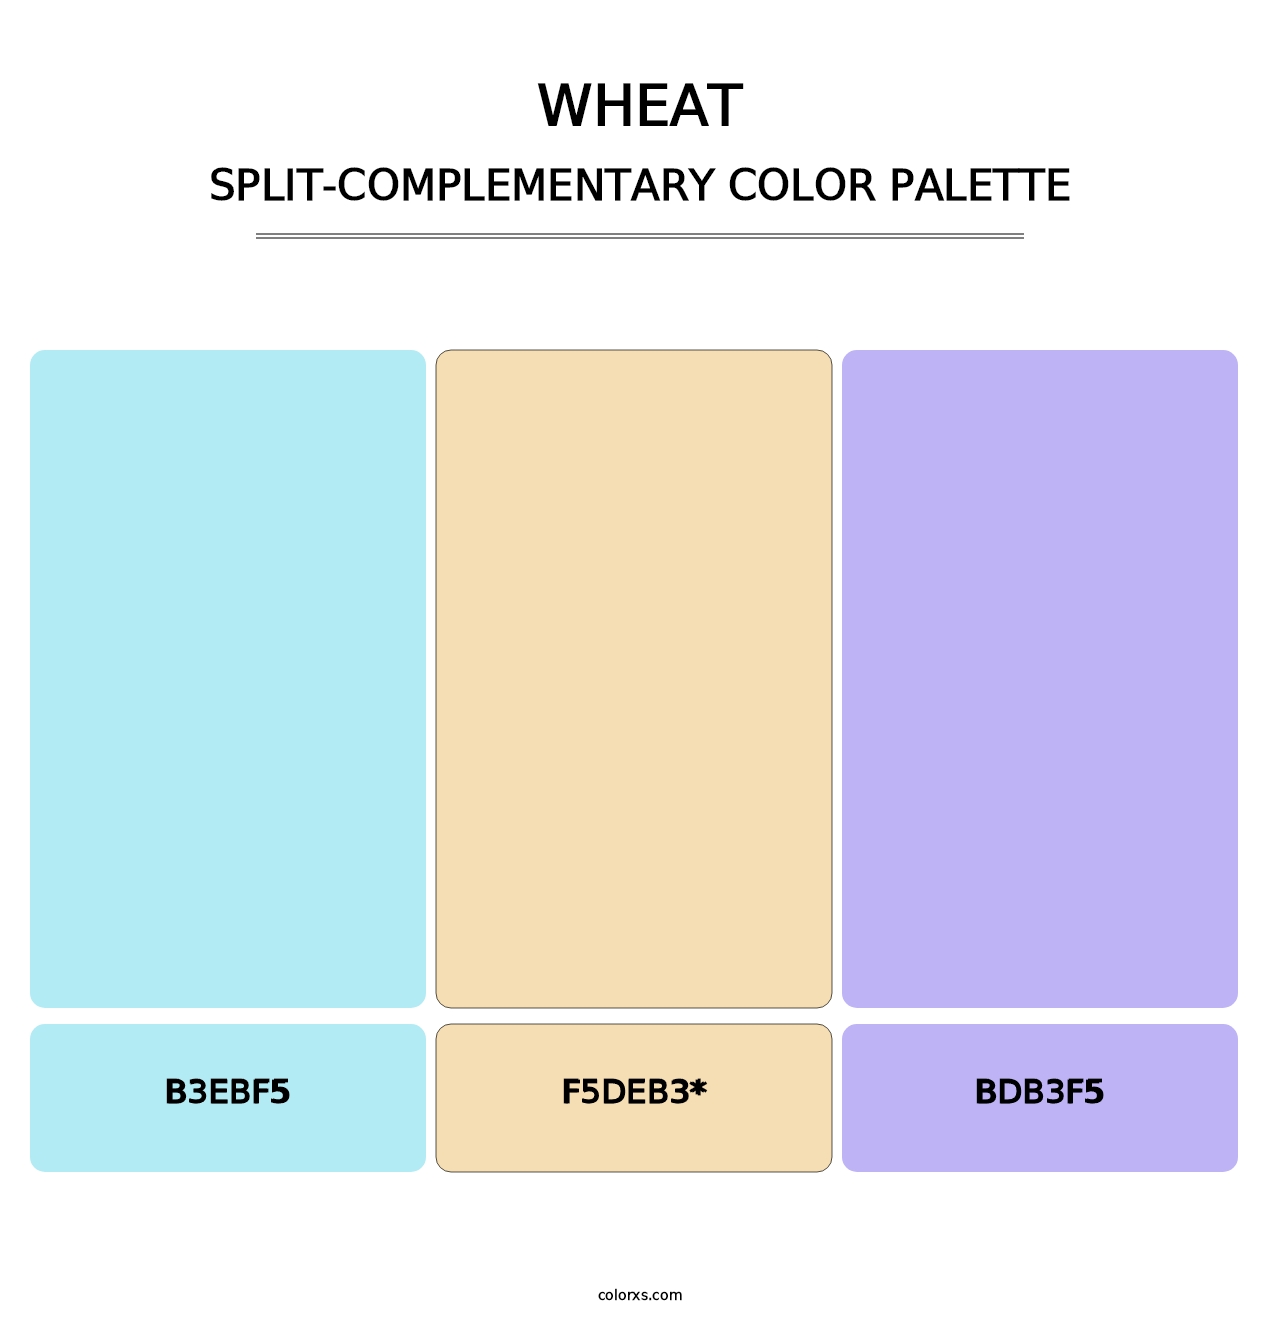 Wheat - Split-Complementary Color Palette